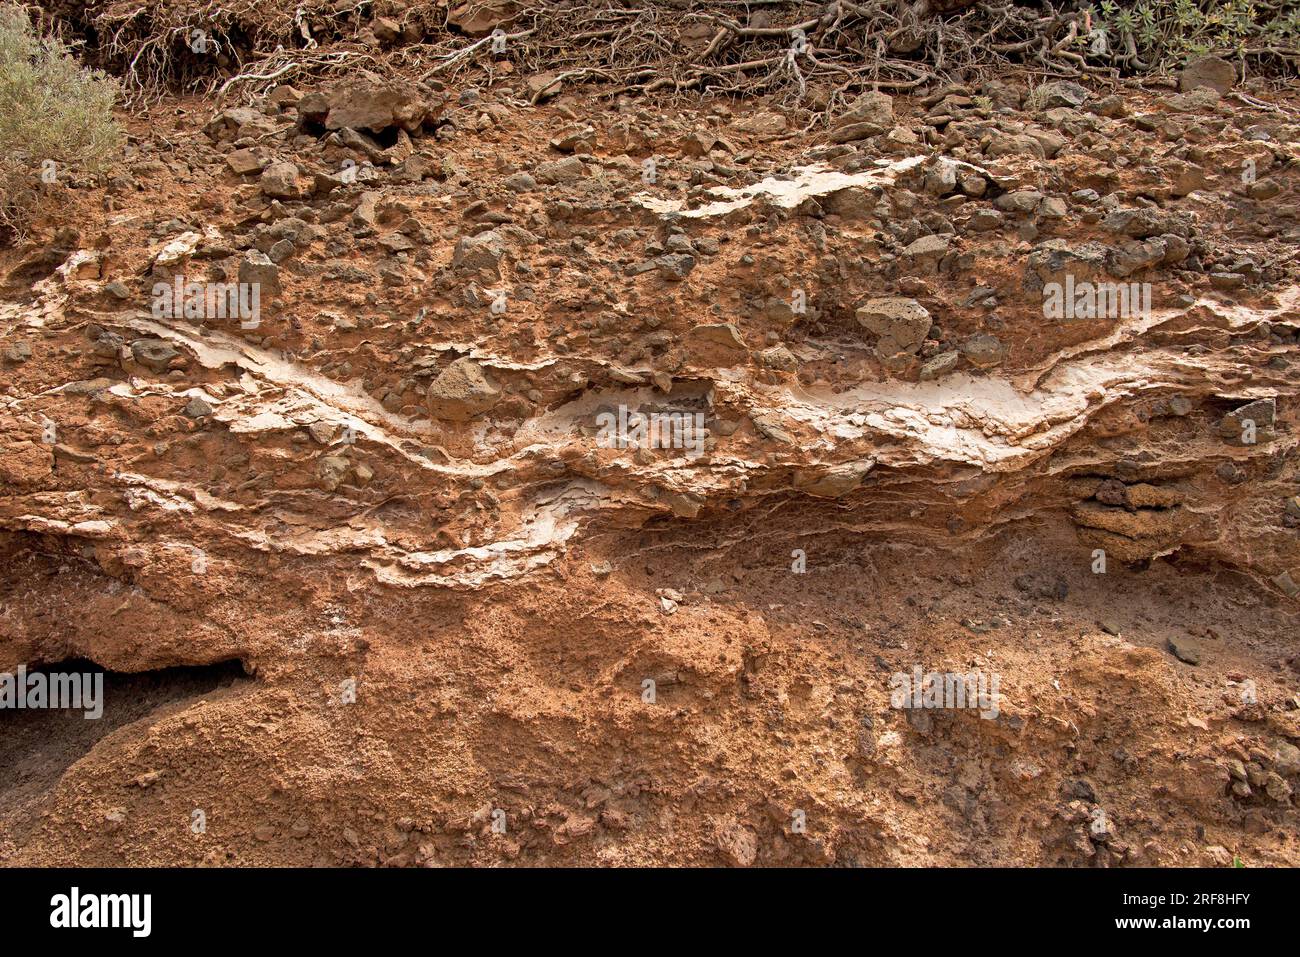 Caliche, calcrete, duricrust or hardpan is a calcium carbonate cement that precipitates between others soil materials. This photo was taken in La Palm Stock Photo